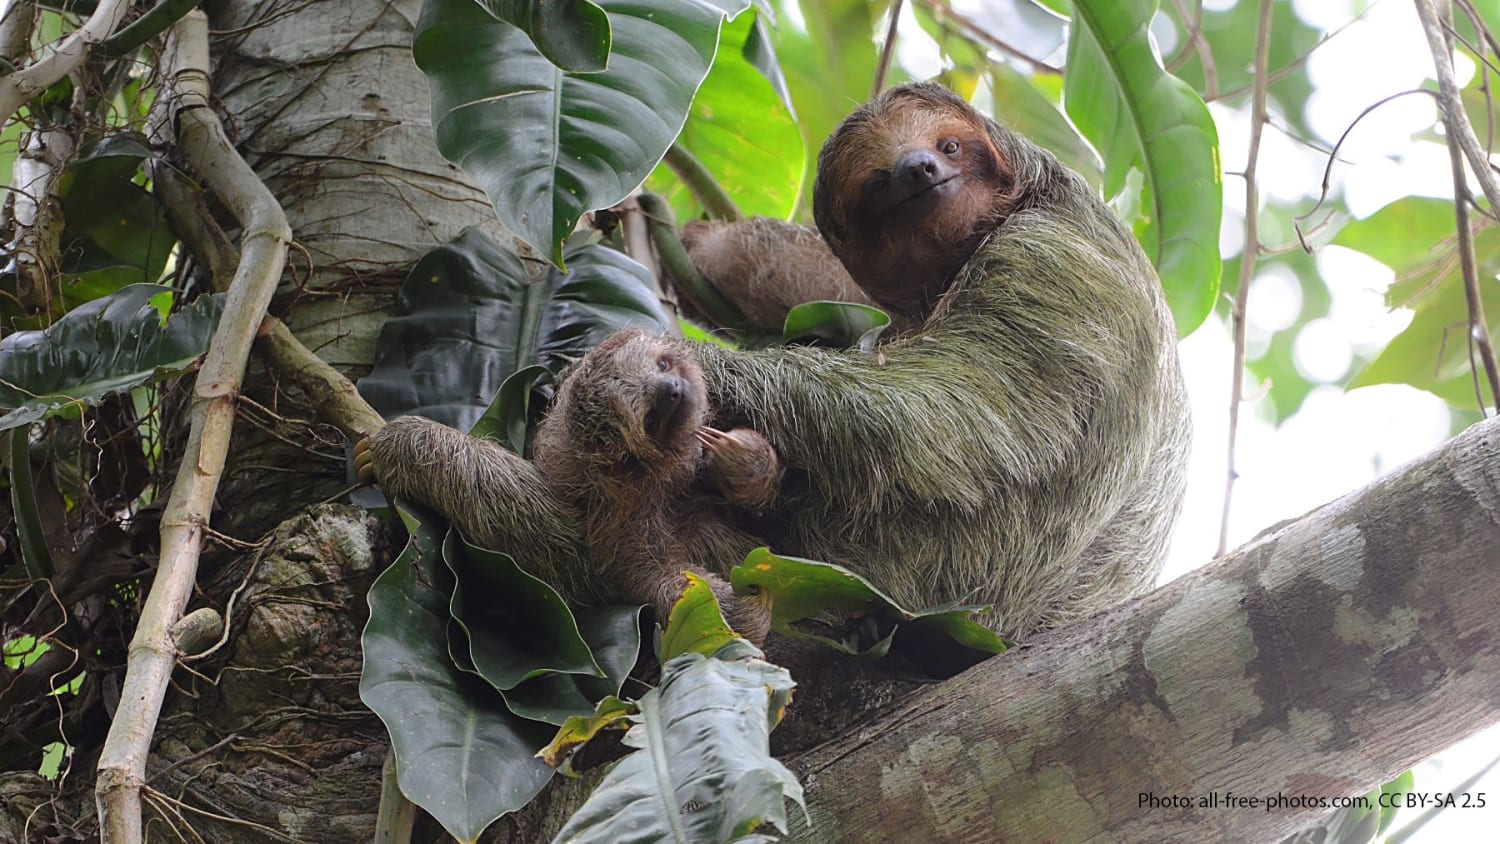 Let’s talk sloth camouflage! #DYK? These slow-moving animals can be hard to spot in treetops because they're covered in green algae which helps hide them from jaguars & eagles. Tiny grooves in sloth hair provide a cozy home for the algae & is passed from mother to infant.